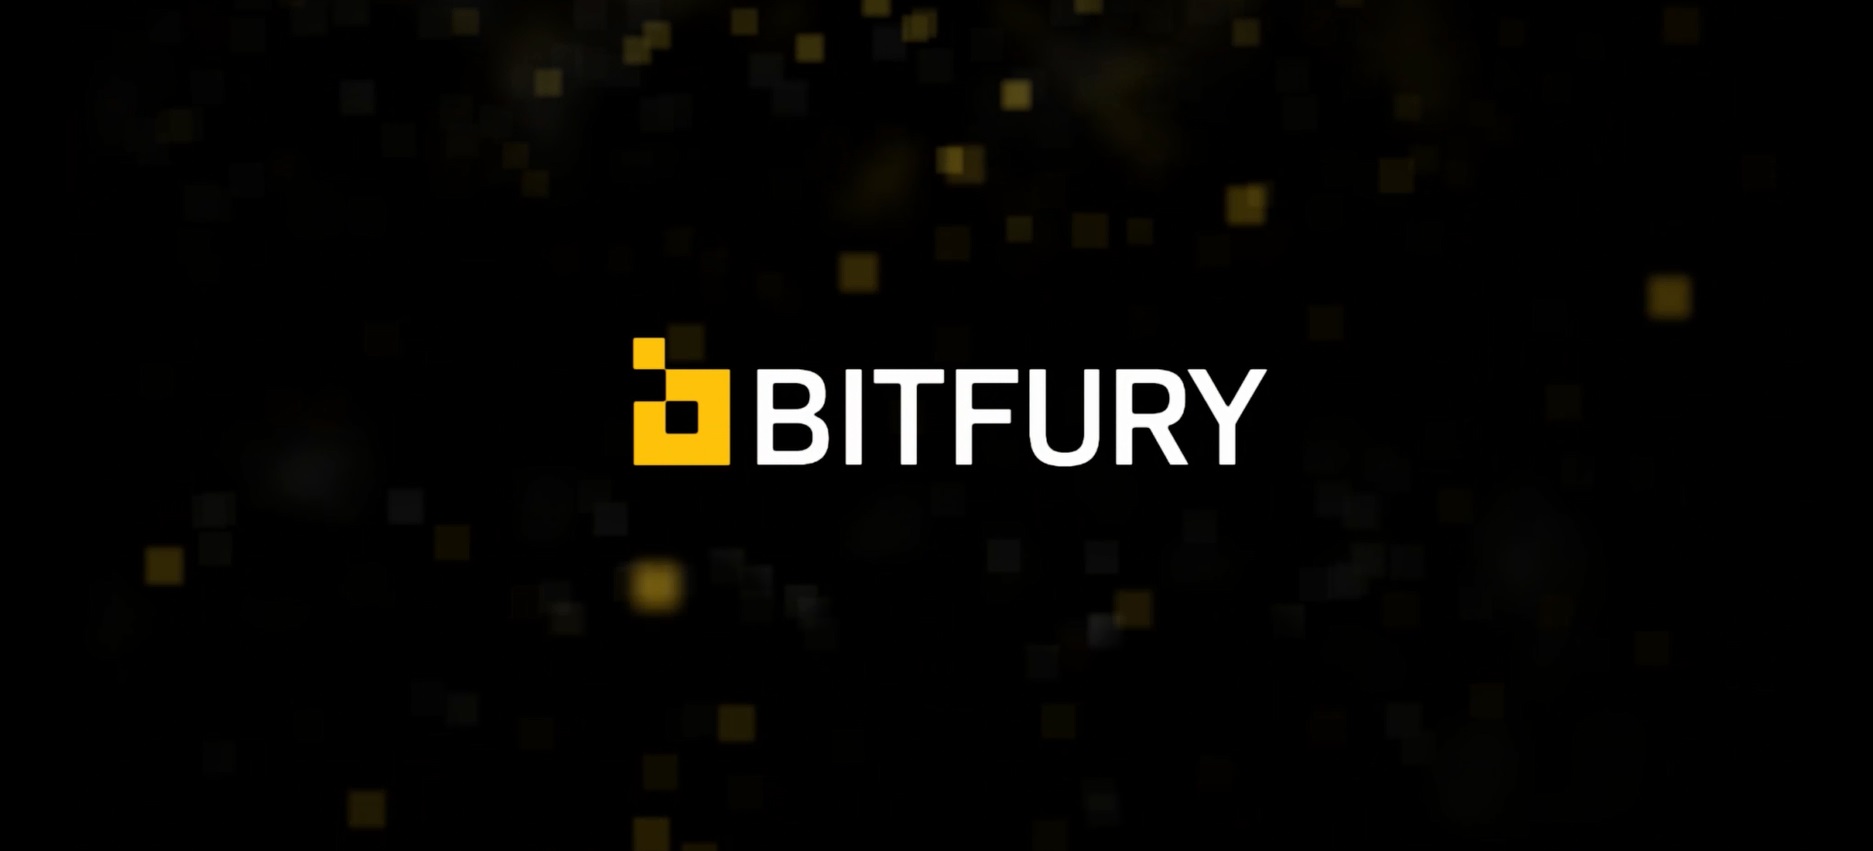 BITFURY IS OPENING AN AI DIVISION